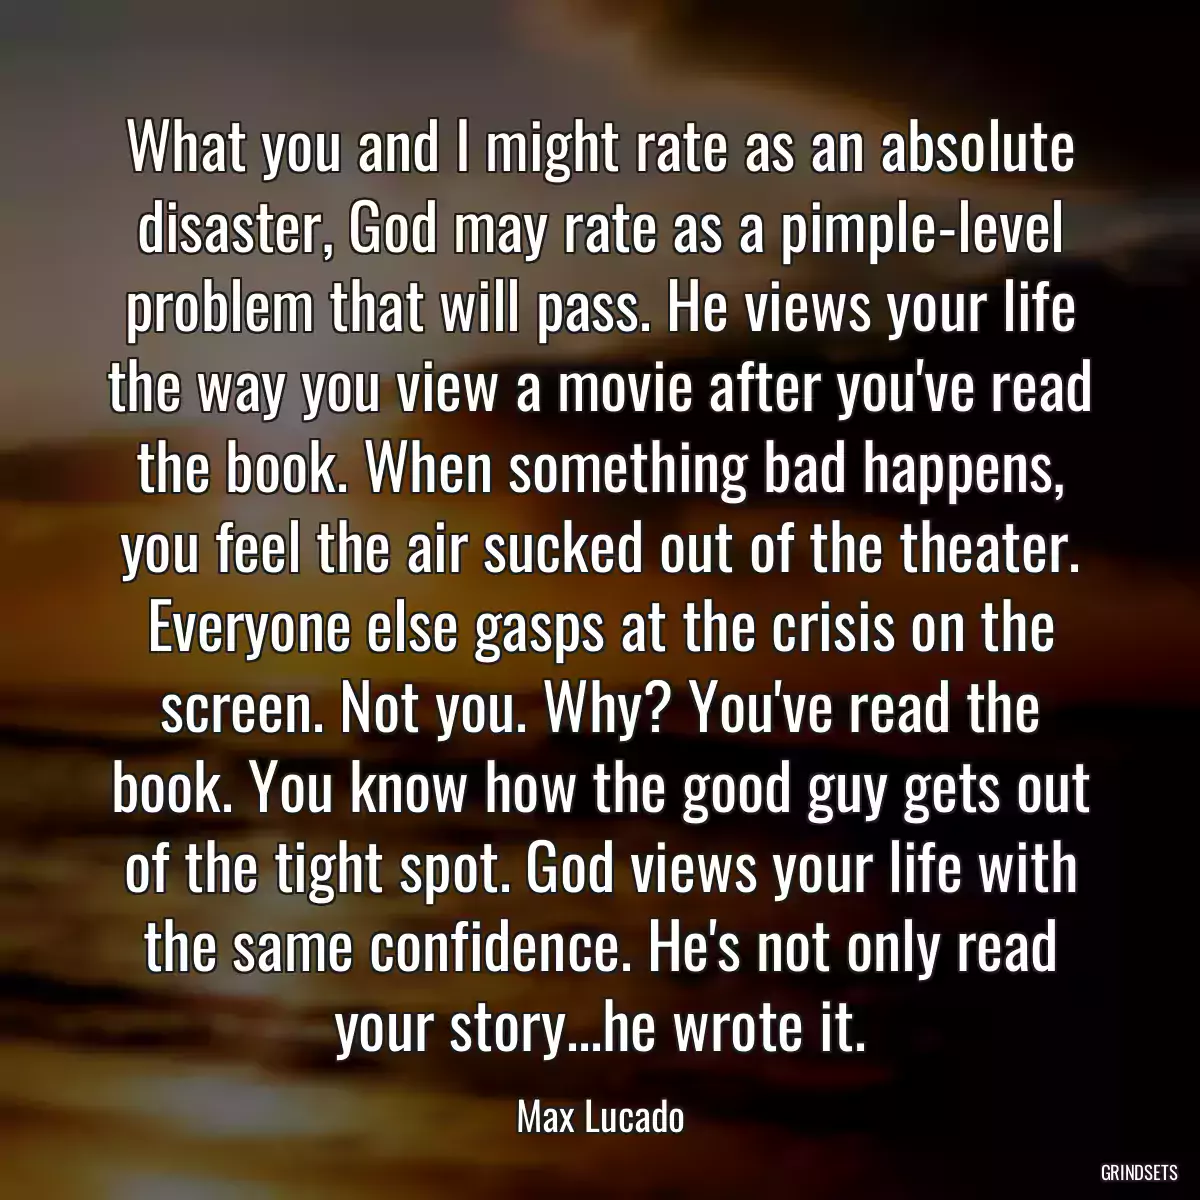 What you and I might rate as an absolute disaster, God may rate as a pimple-level problem that will pass. He views your life the way you view a movie after you\'ve read the book. When something bad happens, you feel the air sucked out of the theater. Everyone else gasps at the crisis on the screen. Not you. Why? You\'ve read the book. You know how the good guy gets out of the tight spot. God views your life with the same confidence. He\'s not only read your story...he wrote it.